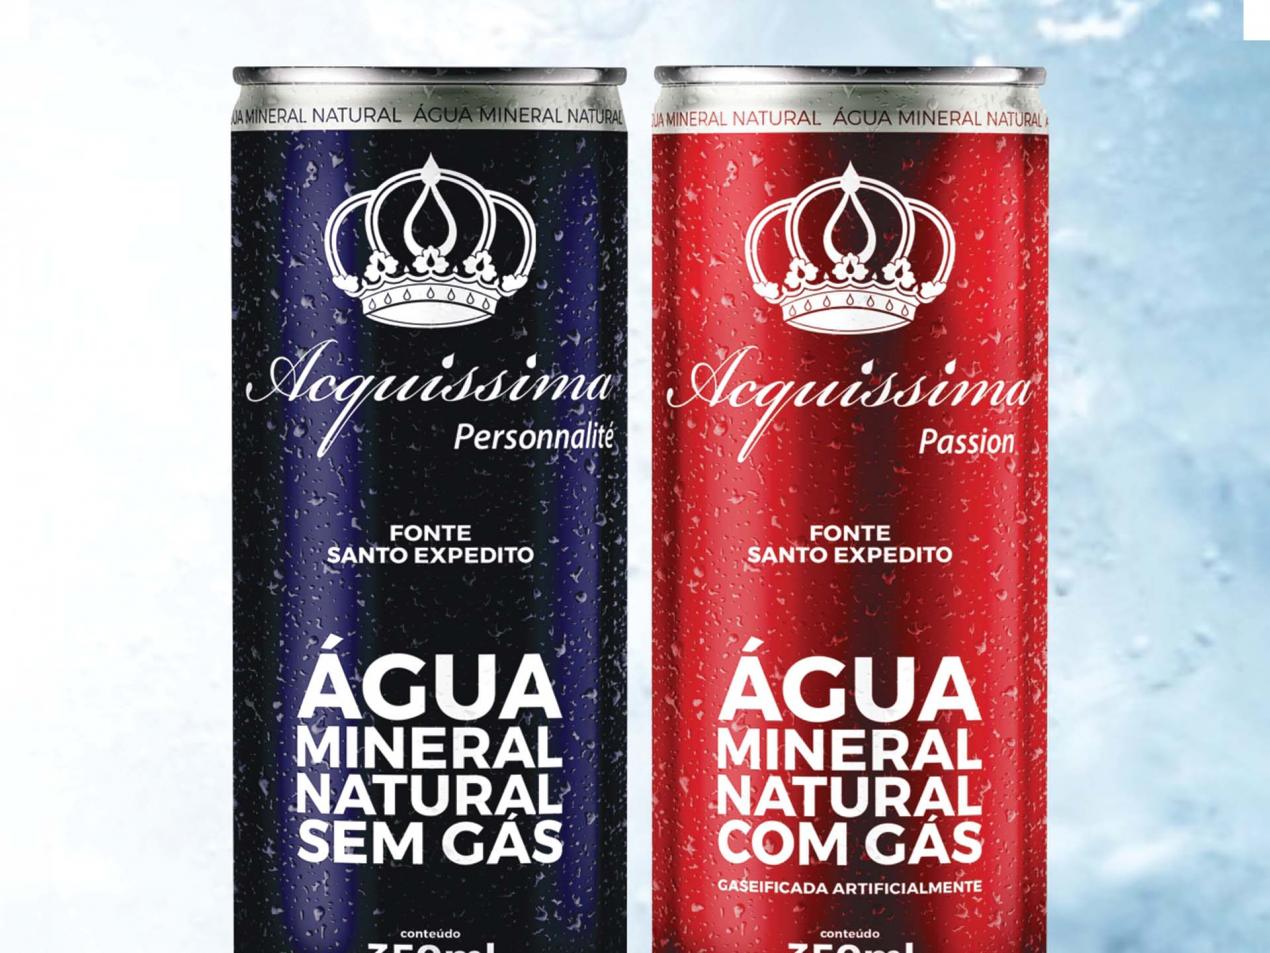 Two aluminum cans - one dark purple and one cherry red - against a light blue background.